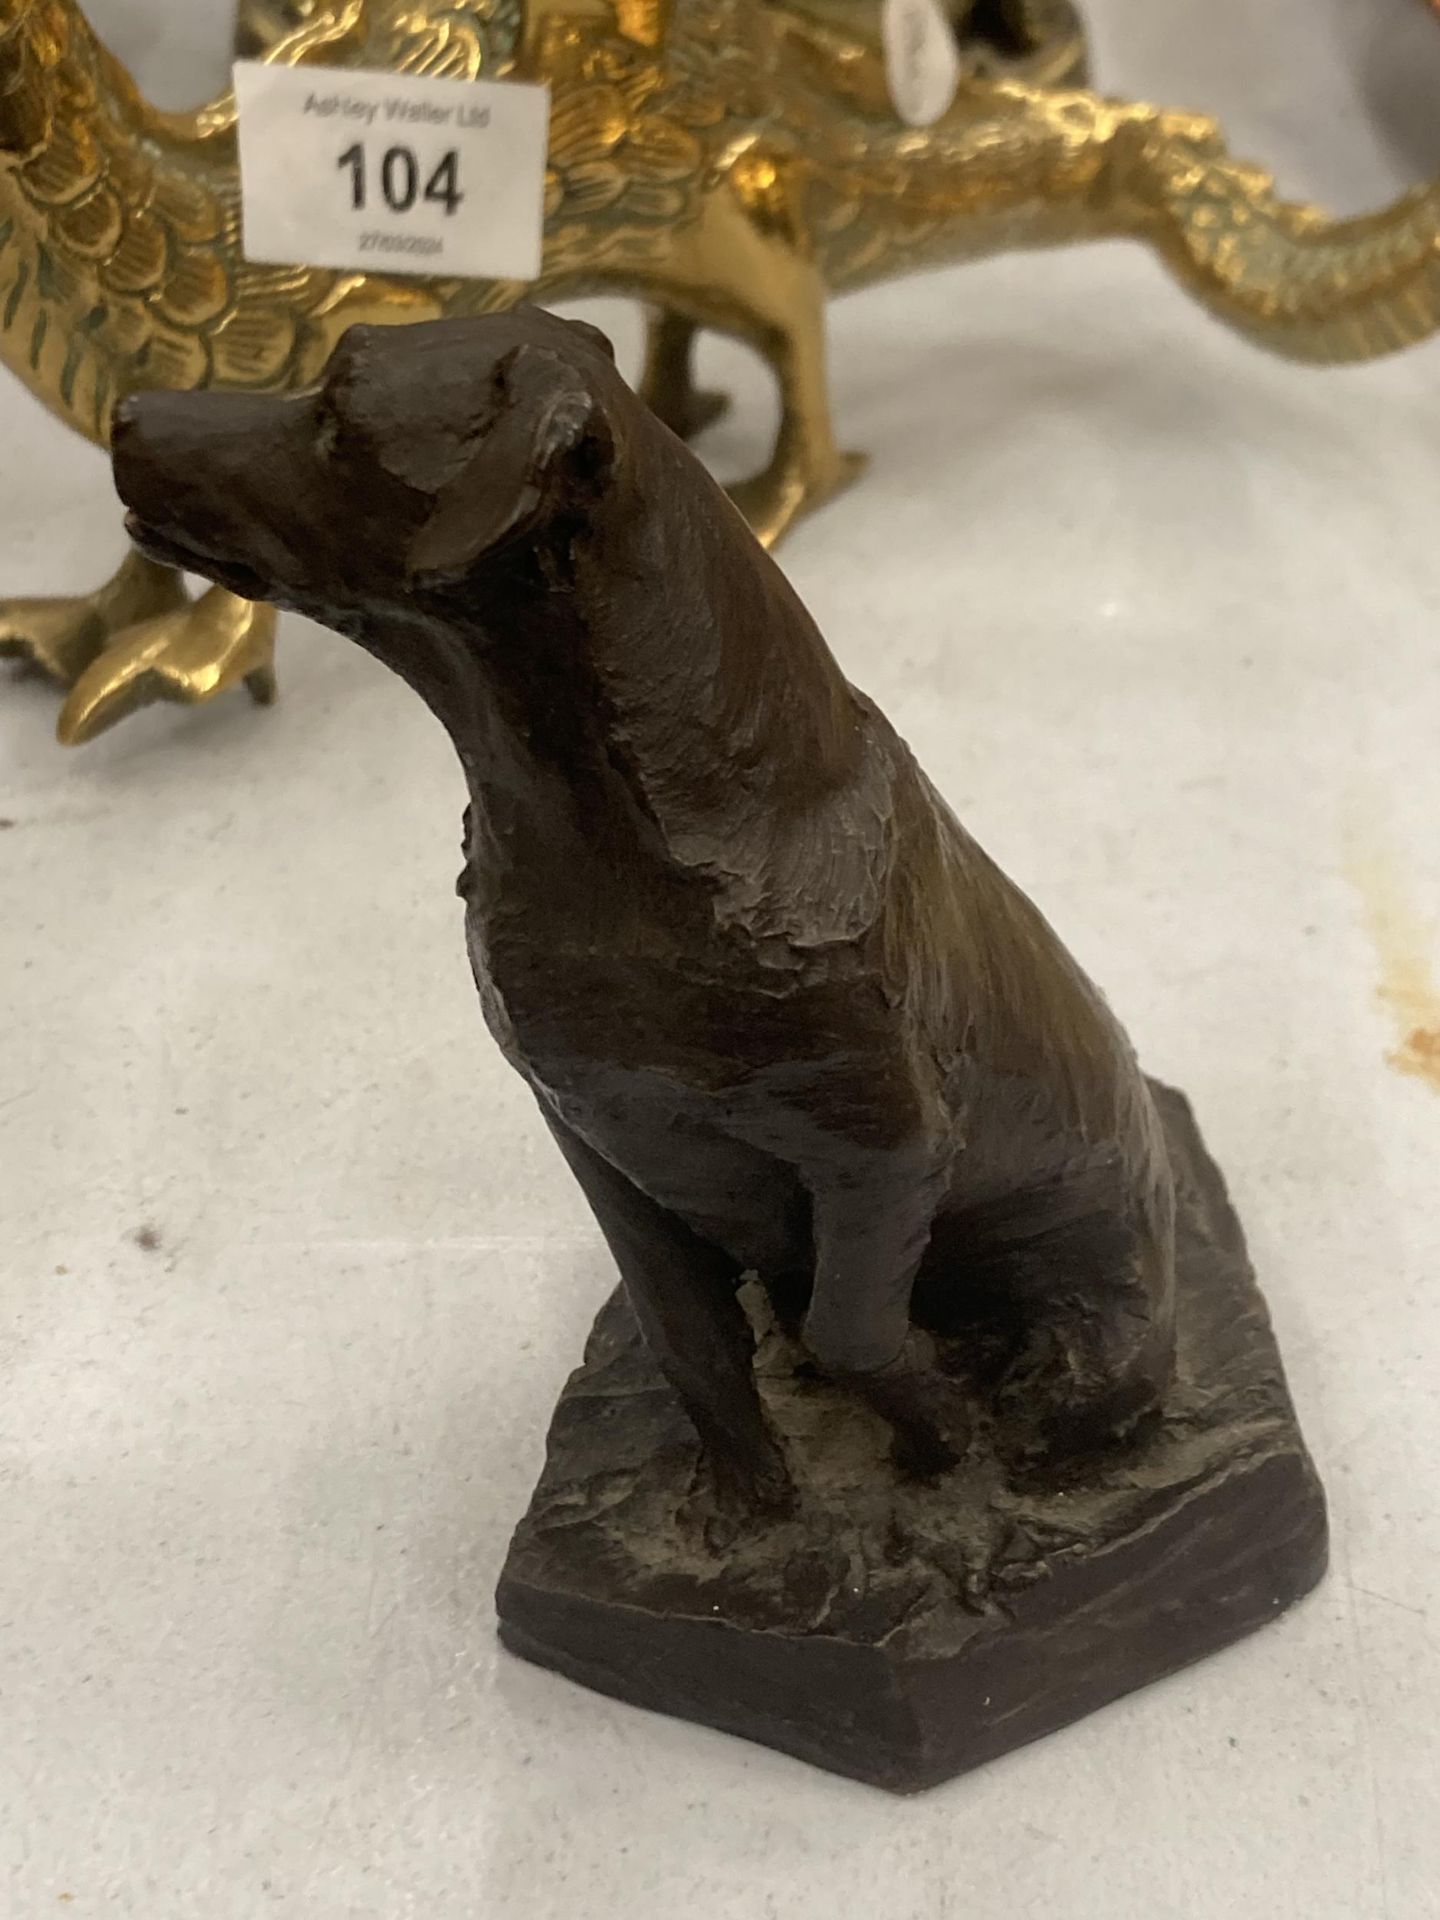 A STONE FIGURE OF A DOG WITH A BRONZED FINISH, HEIGHT 10CM - Image 4 of 4